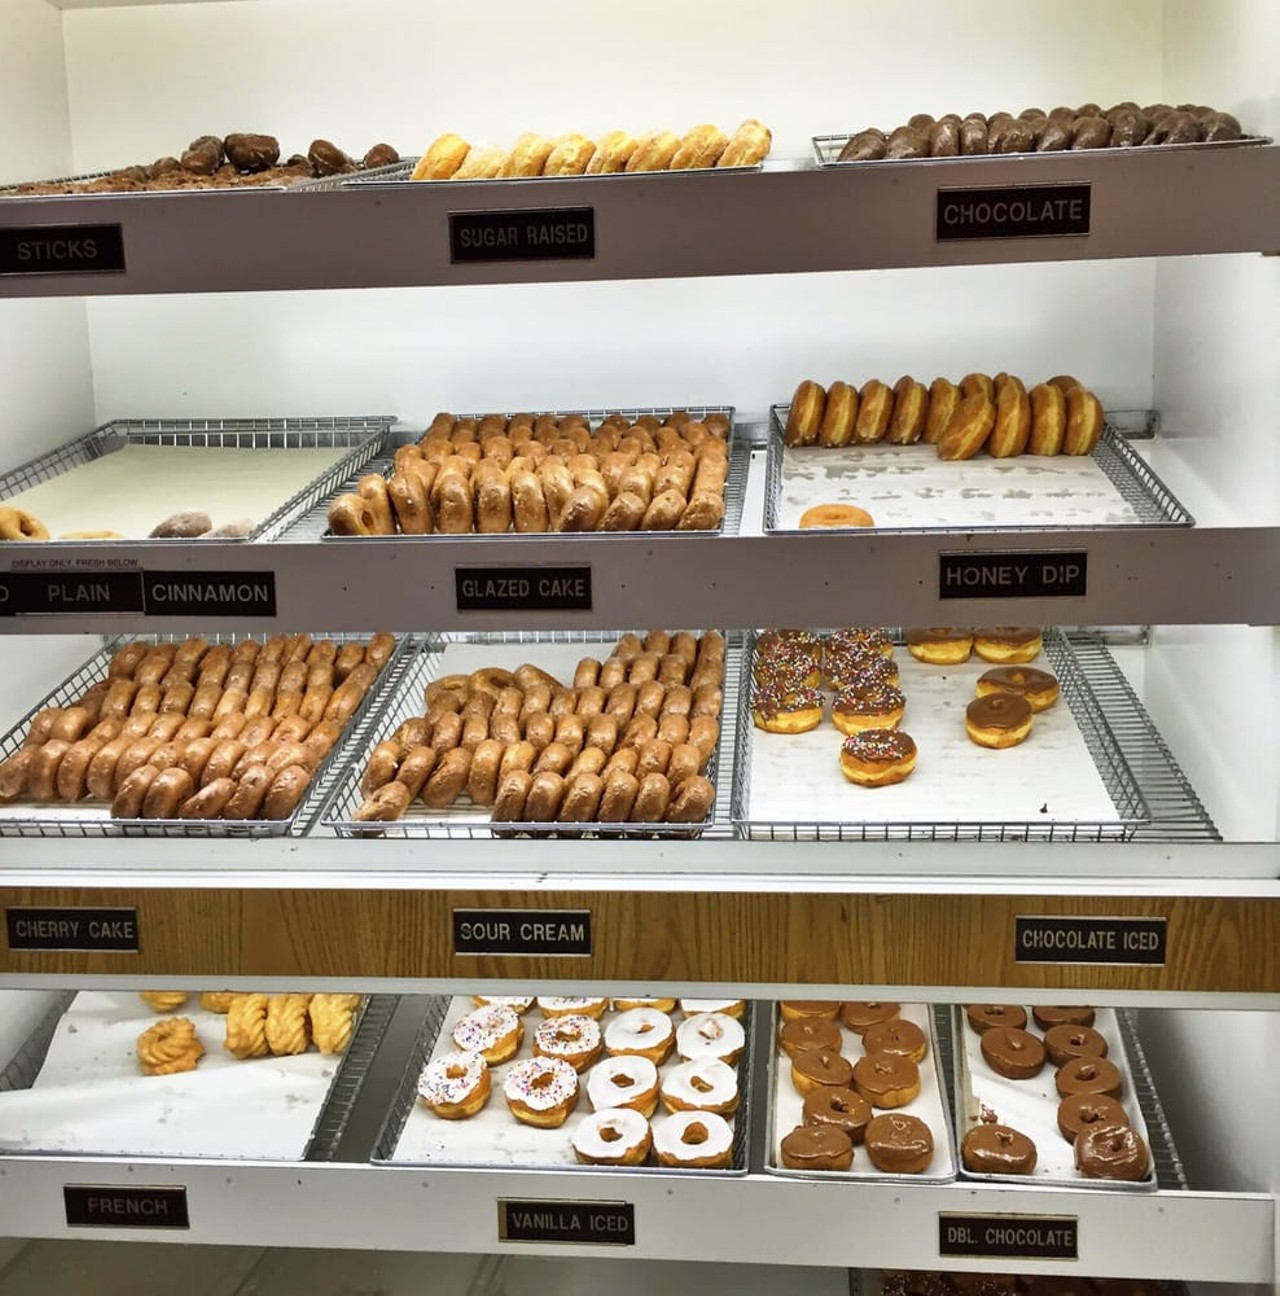  Donutville USA
Location :14829 Ford Rd, Dearborn
Hours: Open 24 Hours